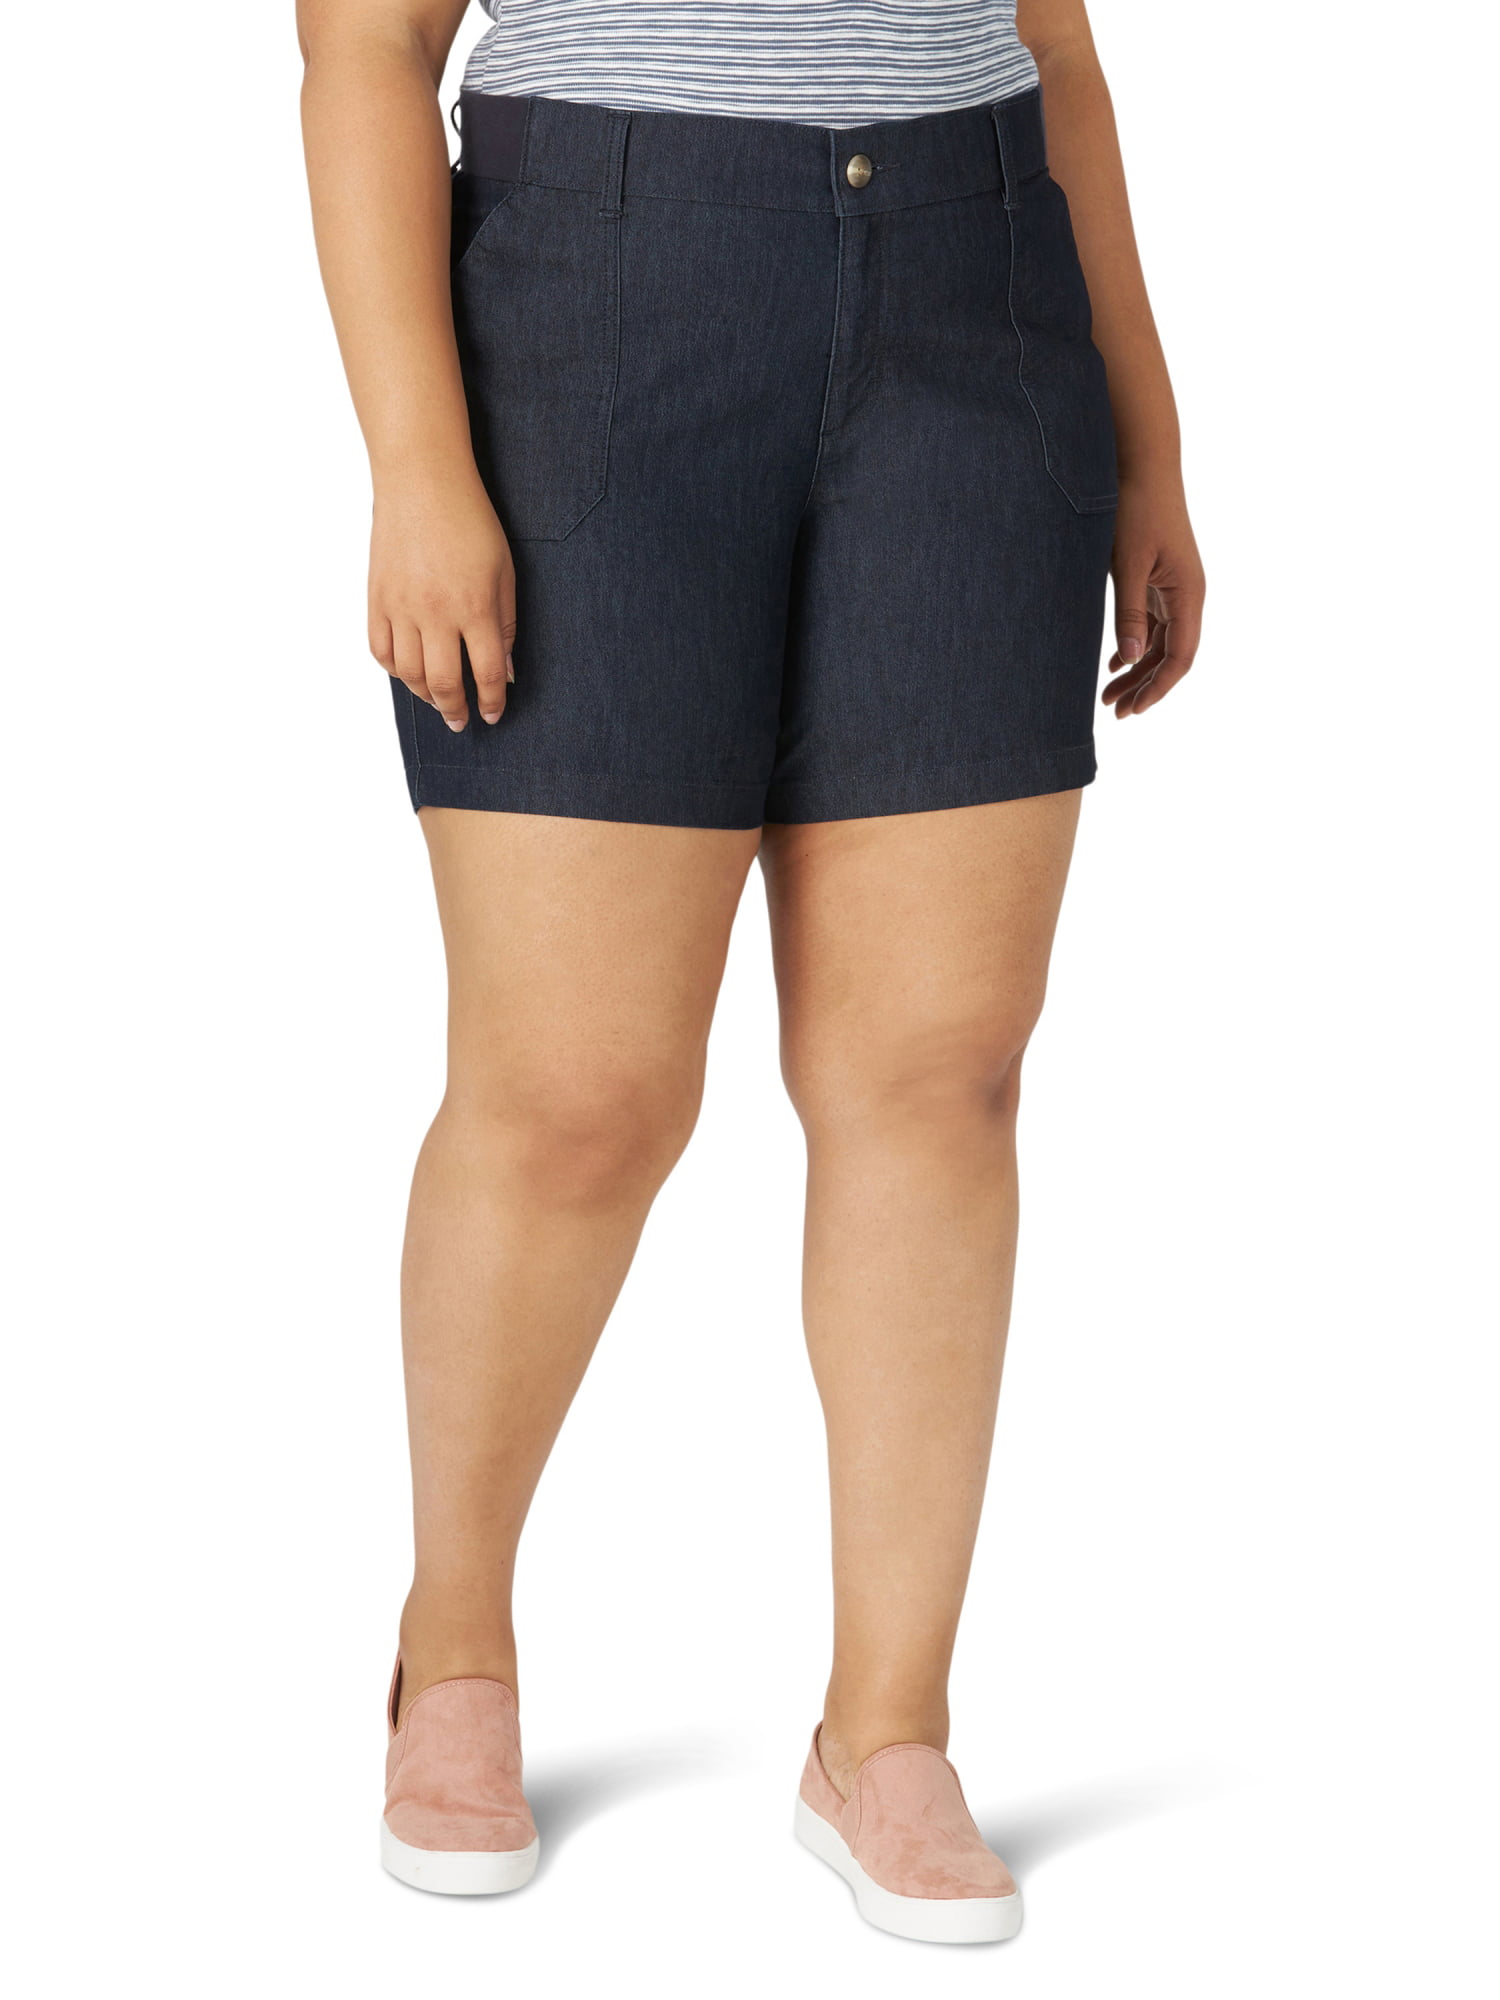 LEE Womens Plus Size Relaxed Fit Kaylin Knit Waist Short